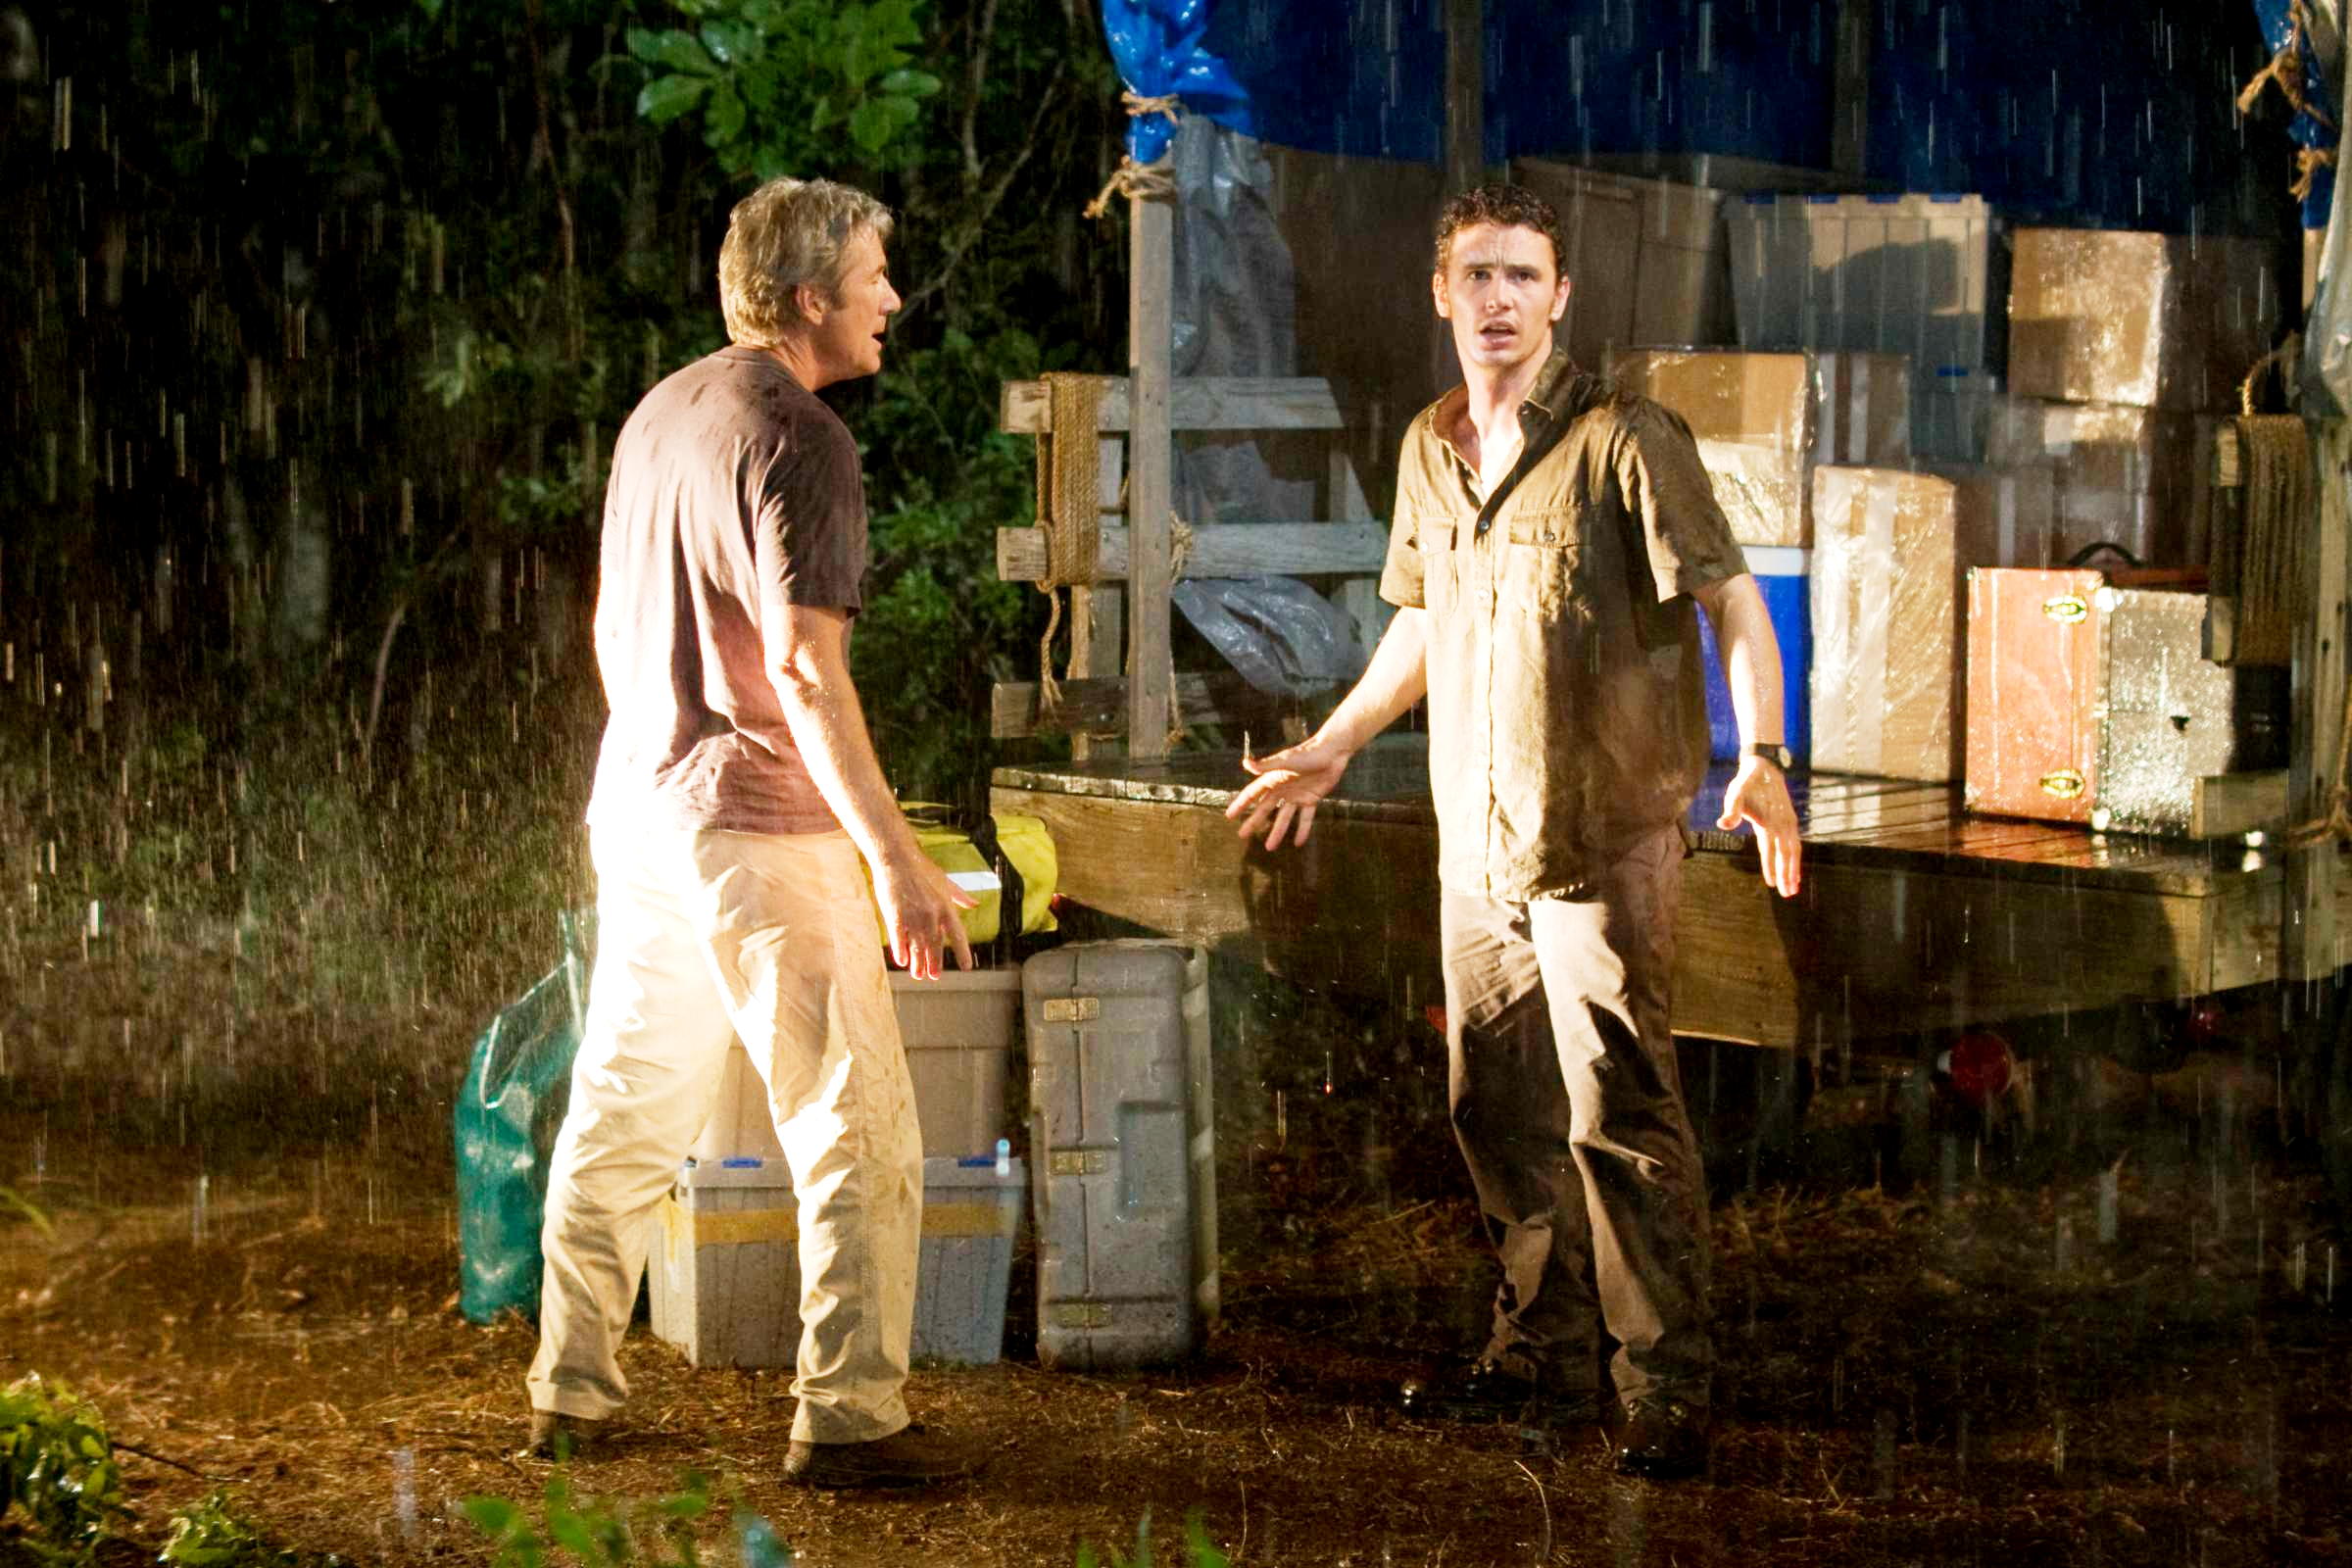 Richard Gere stars as Dr. Paul Flanner and James Franco stars as Mark Flanner in Warner Bros. Pictures' Nights in Rodanthe (2008). Photo credit by Michael Tackett.